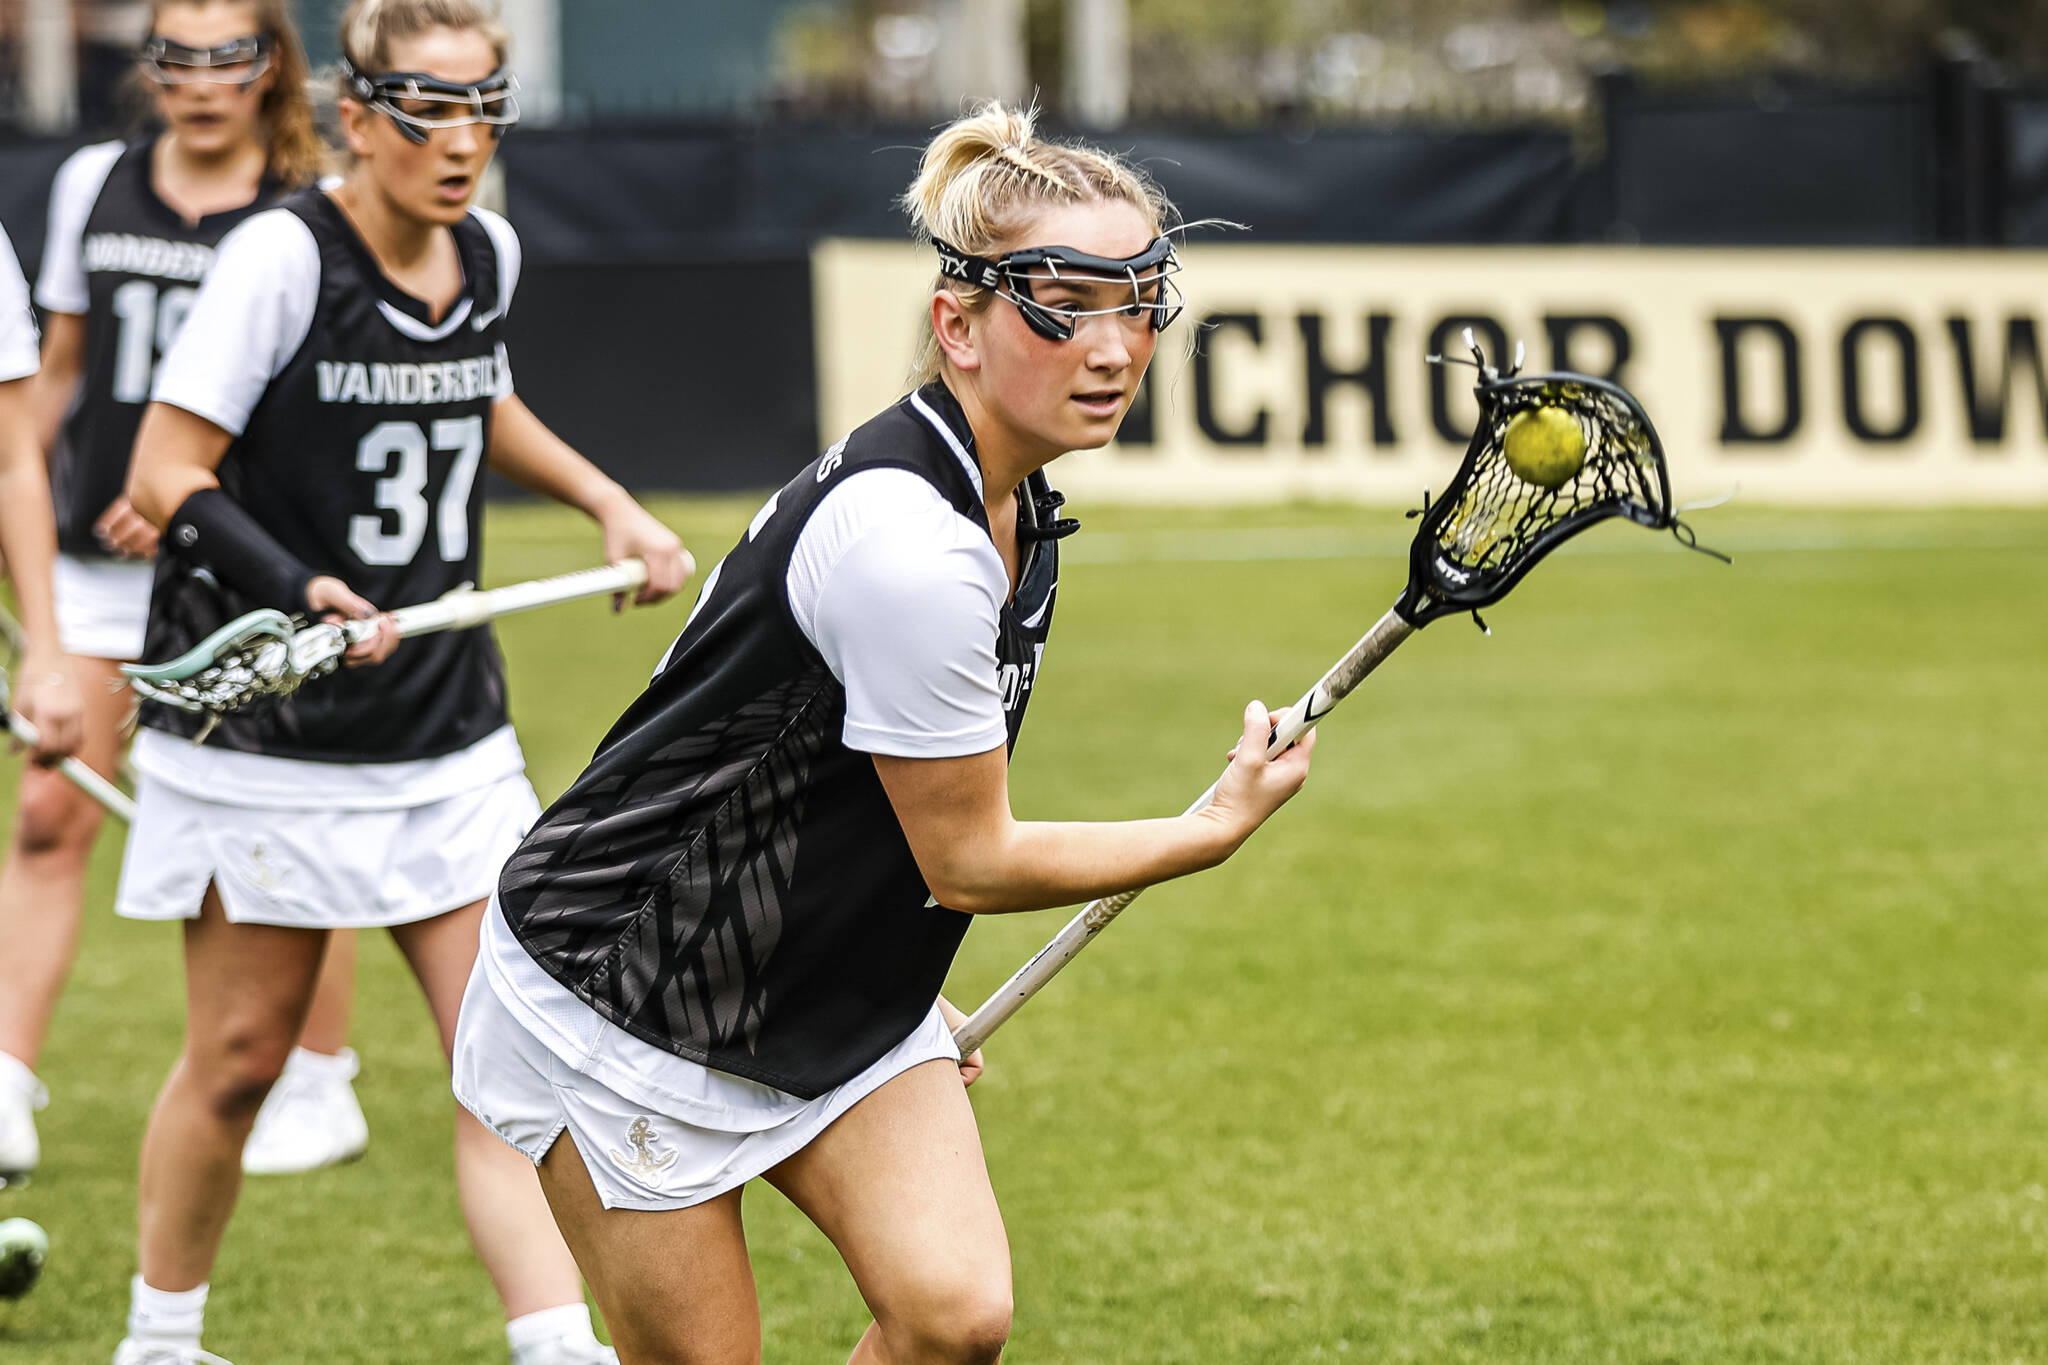 Cailin Bracken plays lacrosse with the Vanderbilt team on March 16, 2022, in Nashville, Tenn. When she became overwhelmed by college life, especially when she had to isolate upon testing positive for COVID-19 after just a few days on campus, she decided to leave the team. Bracken wrote an open letter to college sports, calling on coaches and administrators to become more cognizant of the challenges athletes face in navigating not only their competitive side, but also their social and academic responsibilities. (Josh Rehders / Vanderbilt University)